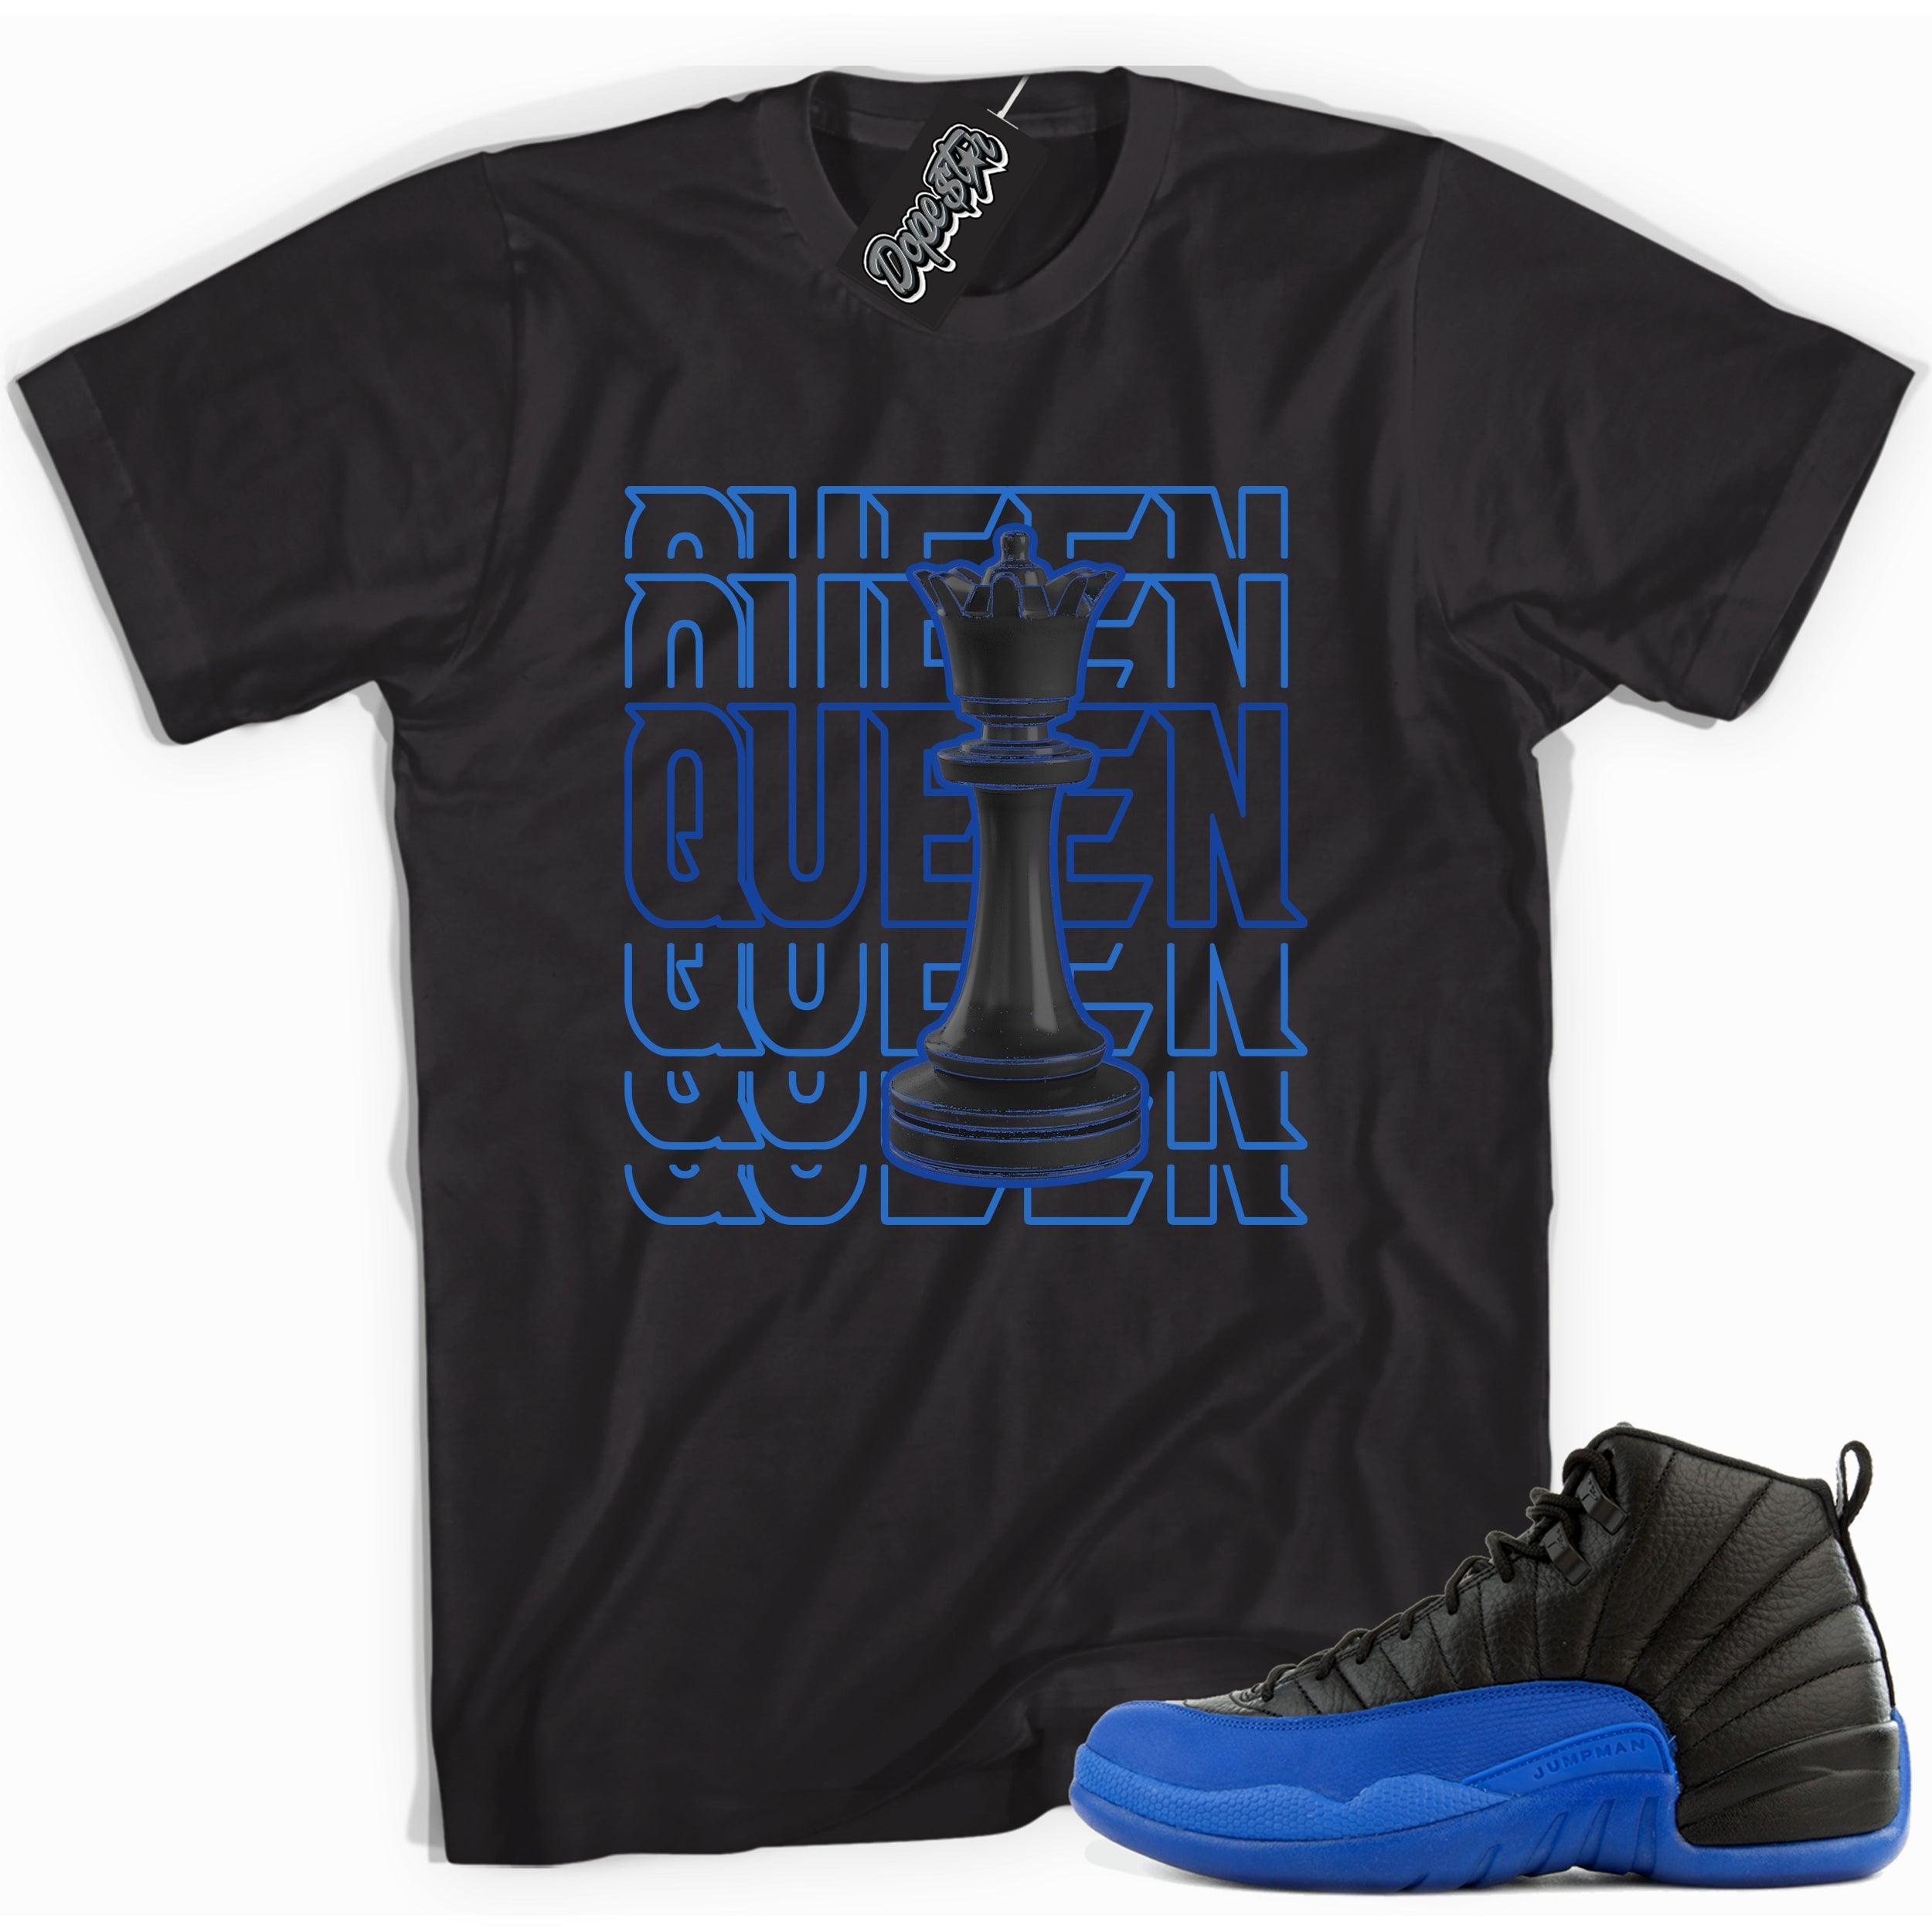 Cool black graphic tee with 'queen piece' print, that perfectly matches  Air Jordan 12 Retro Black Game Royal sneakers.